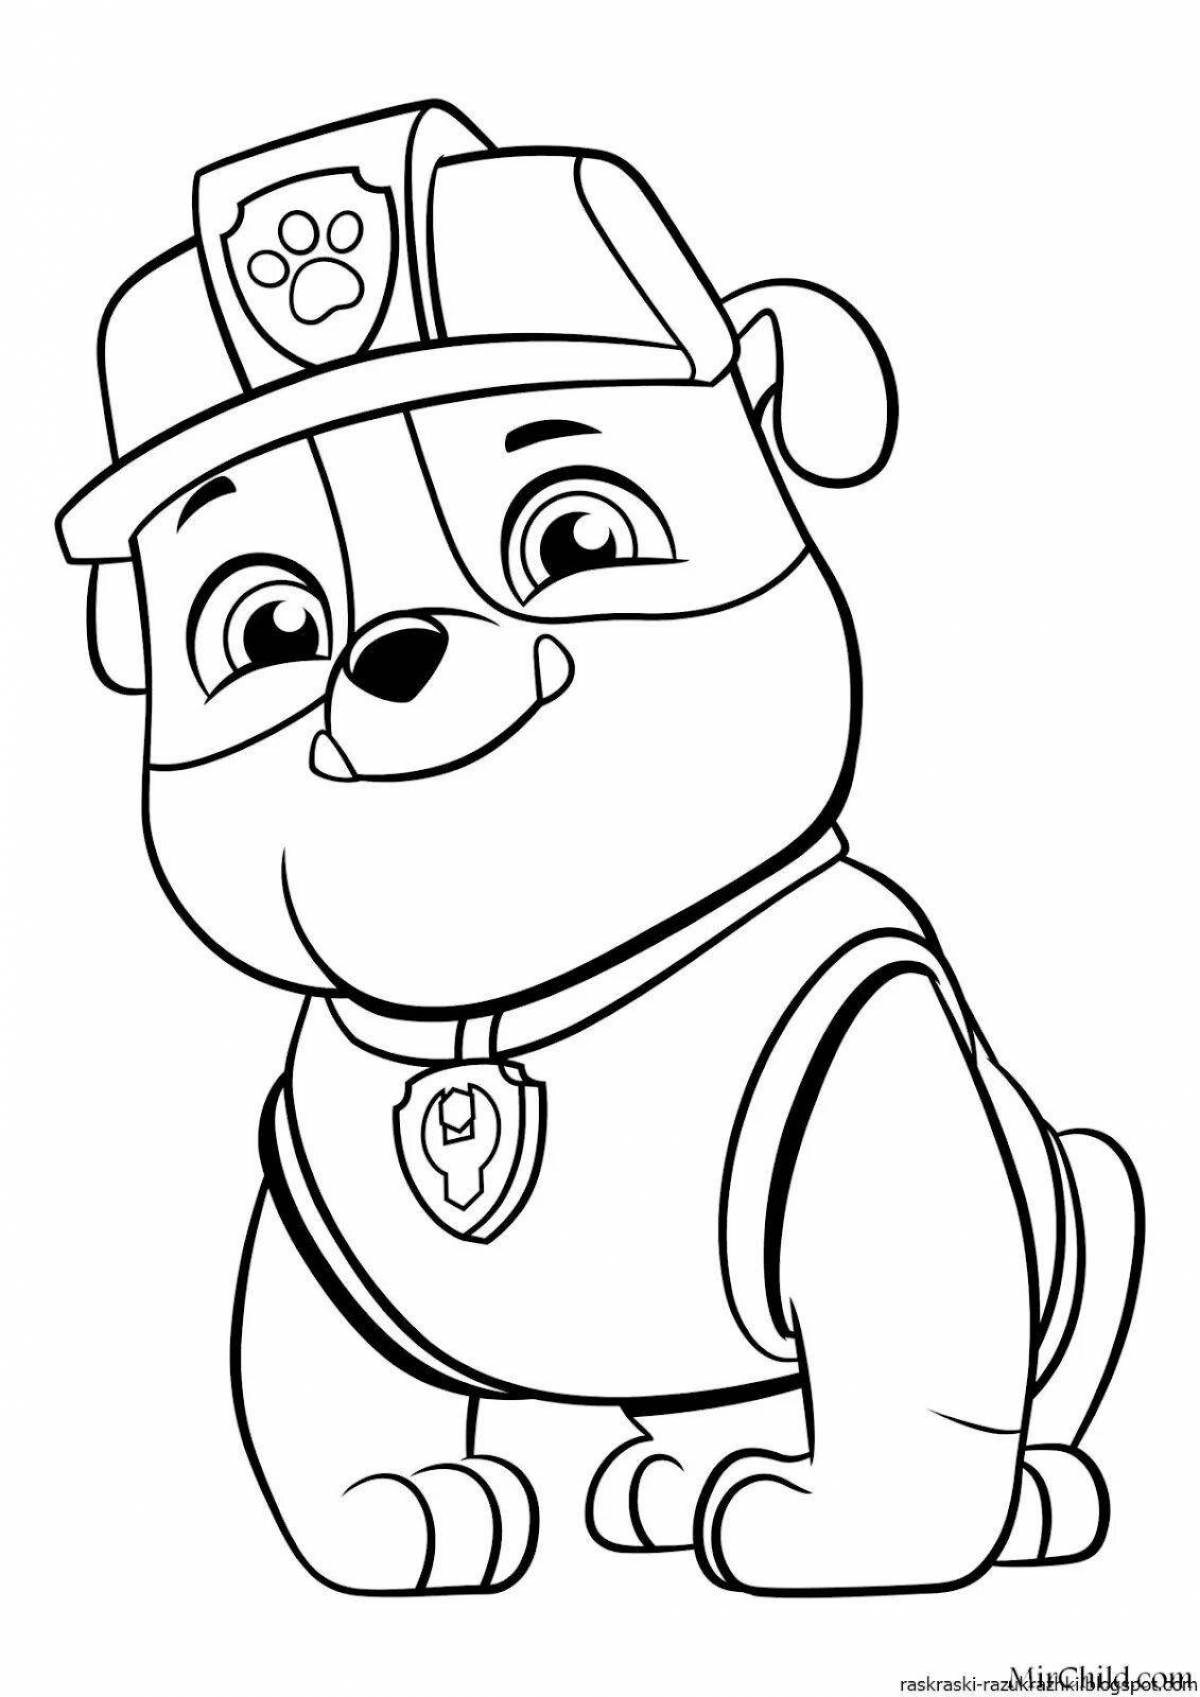 Coloring book with live cartoon characters for children 3-4 years old